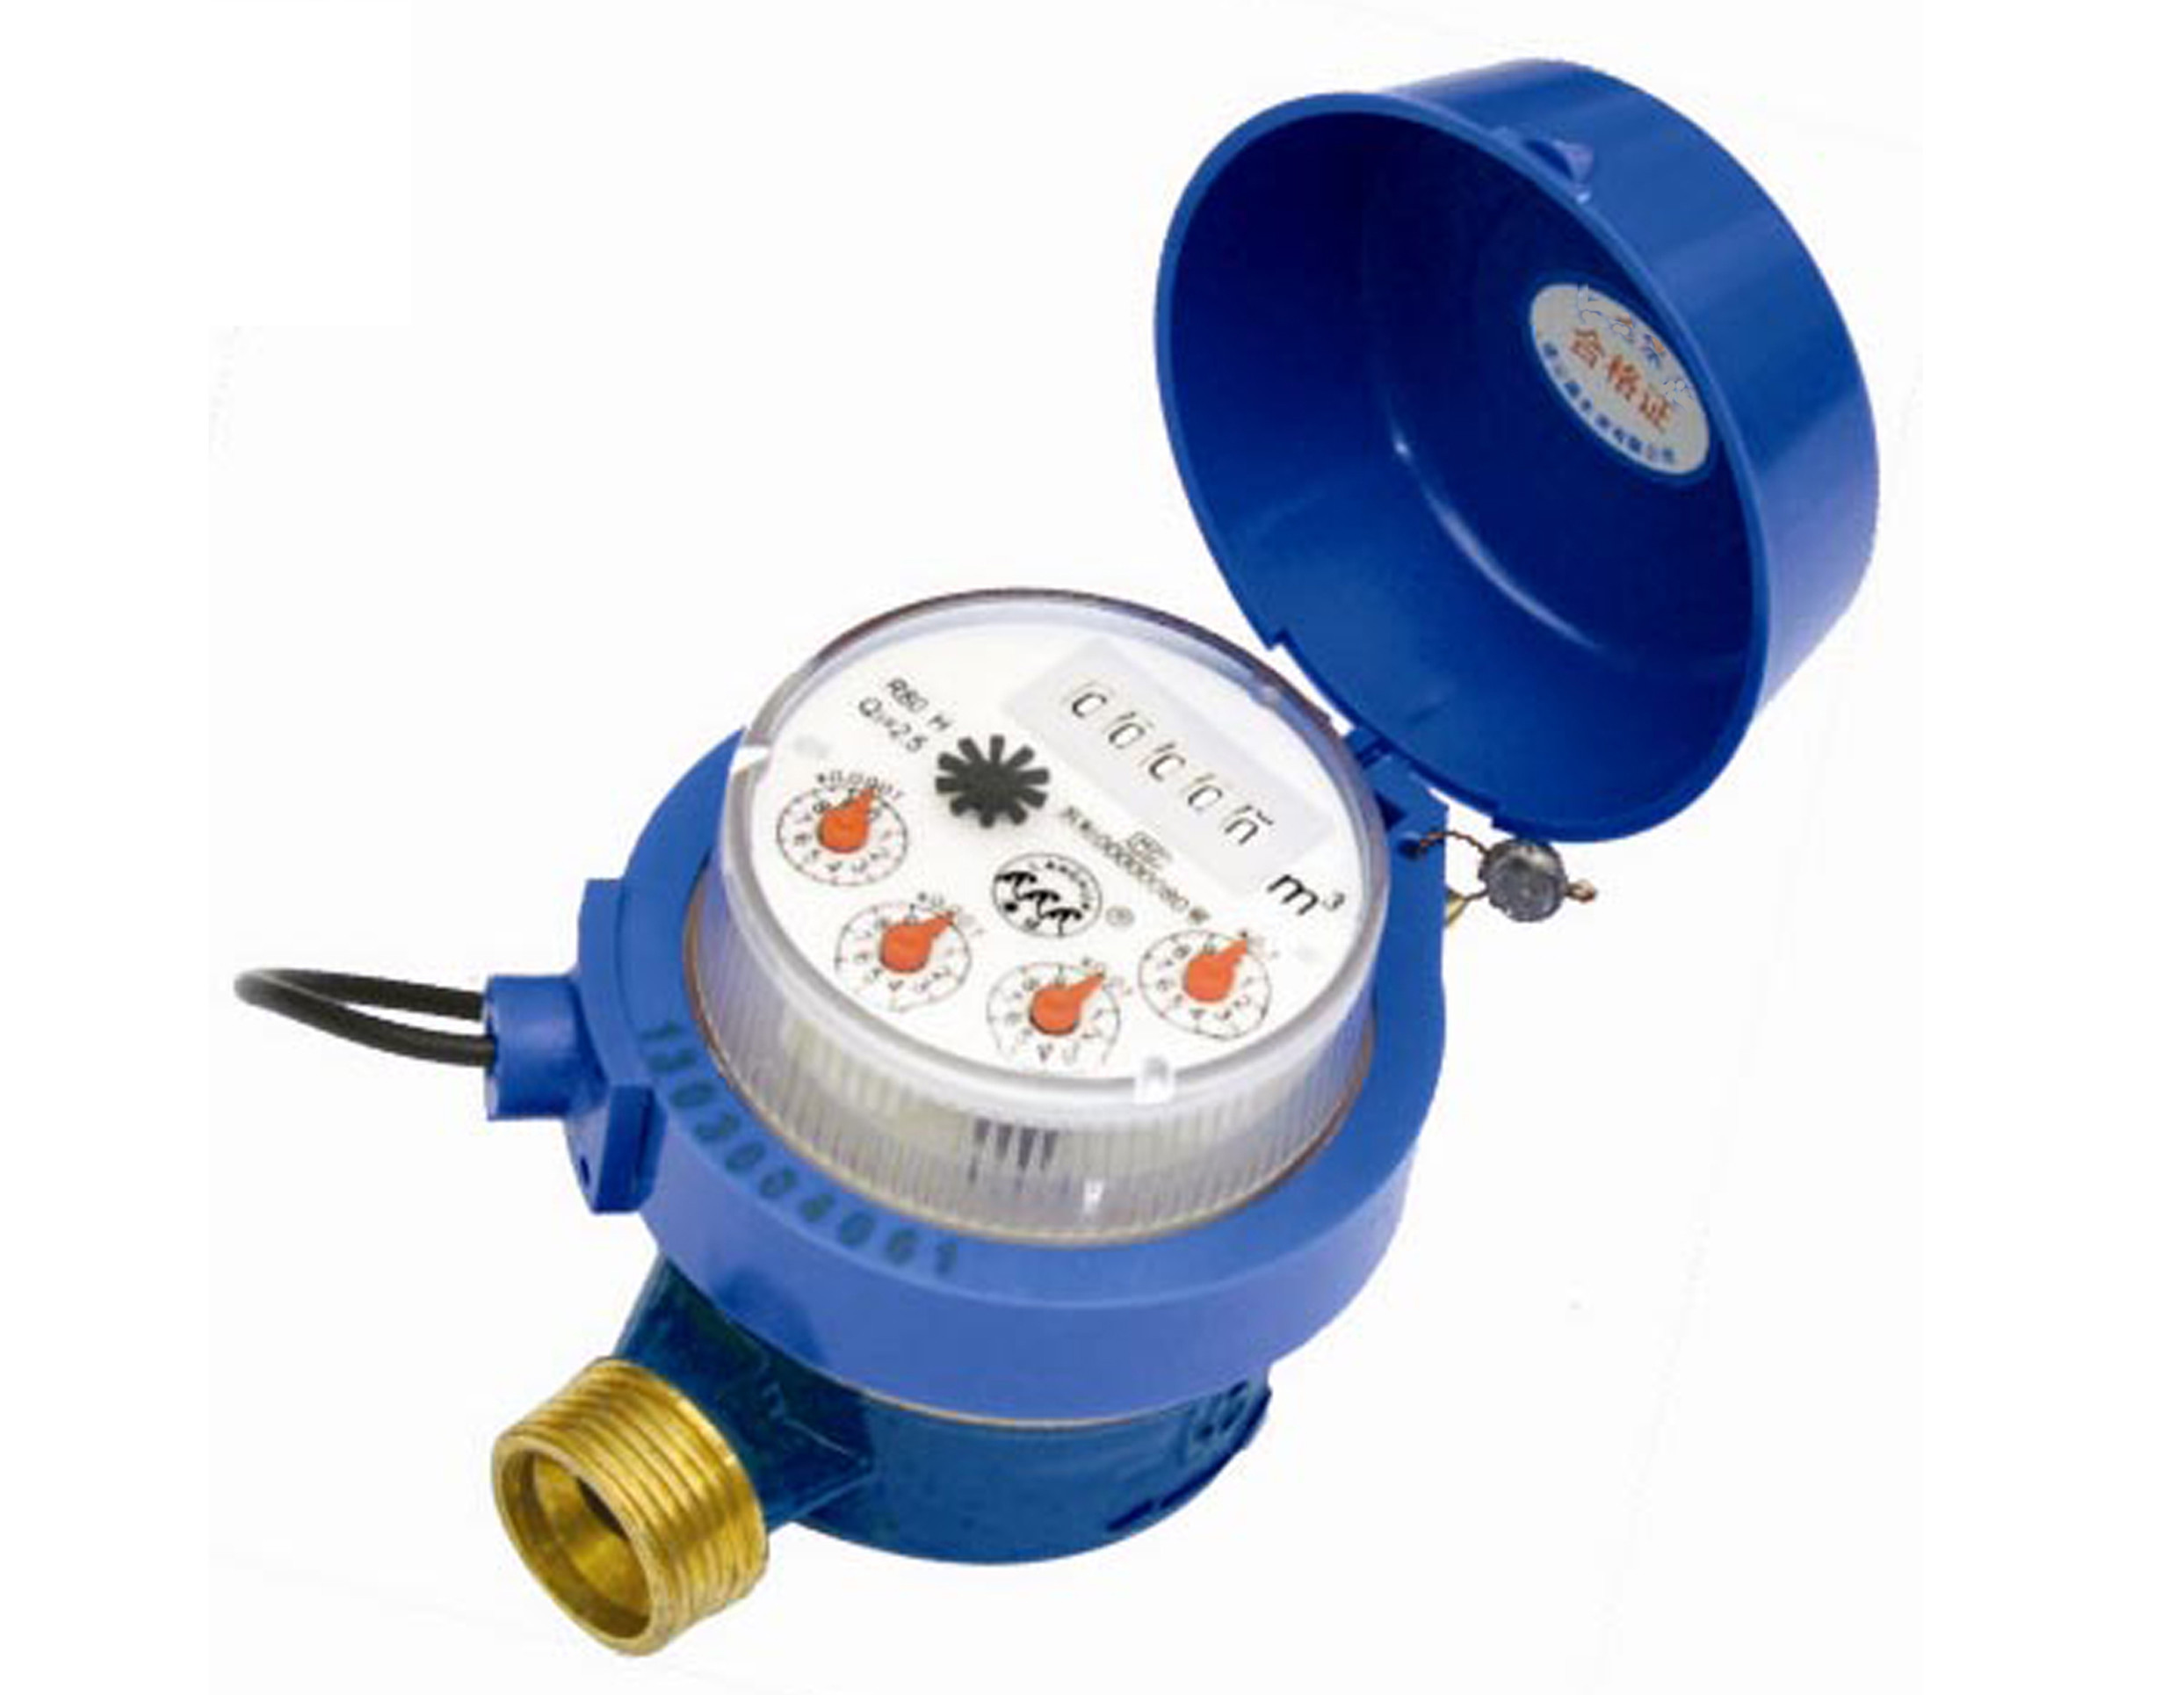 Best M - BUS AMR Water Meter R80 Value Remote Reading With Pulse Emitter wholesale